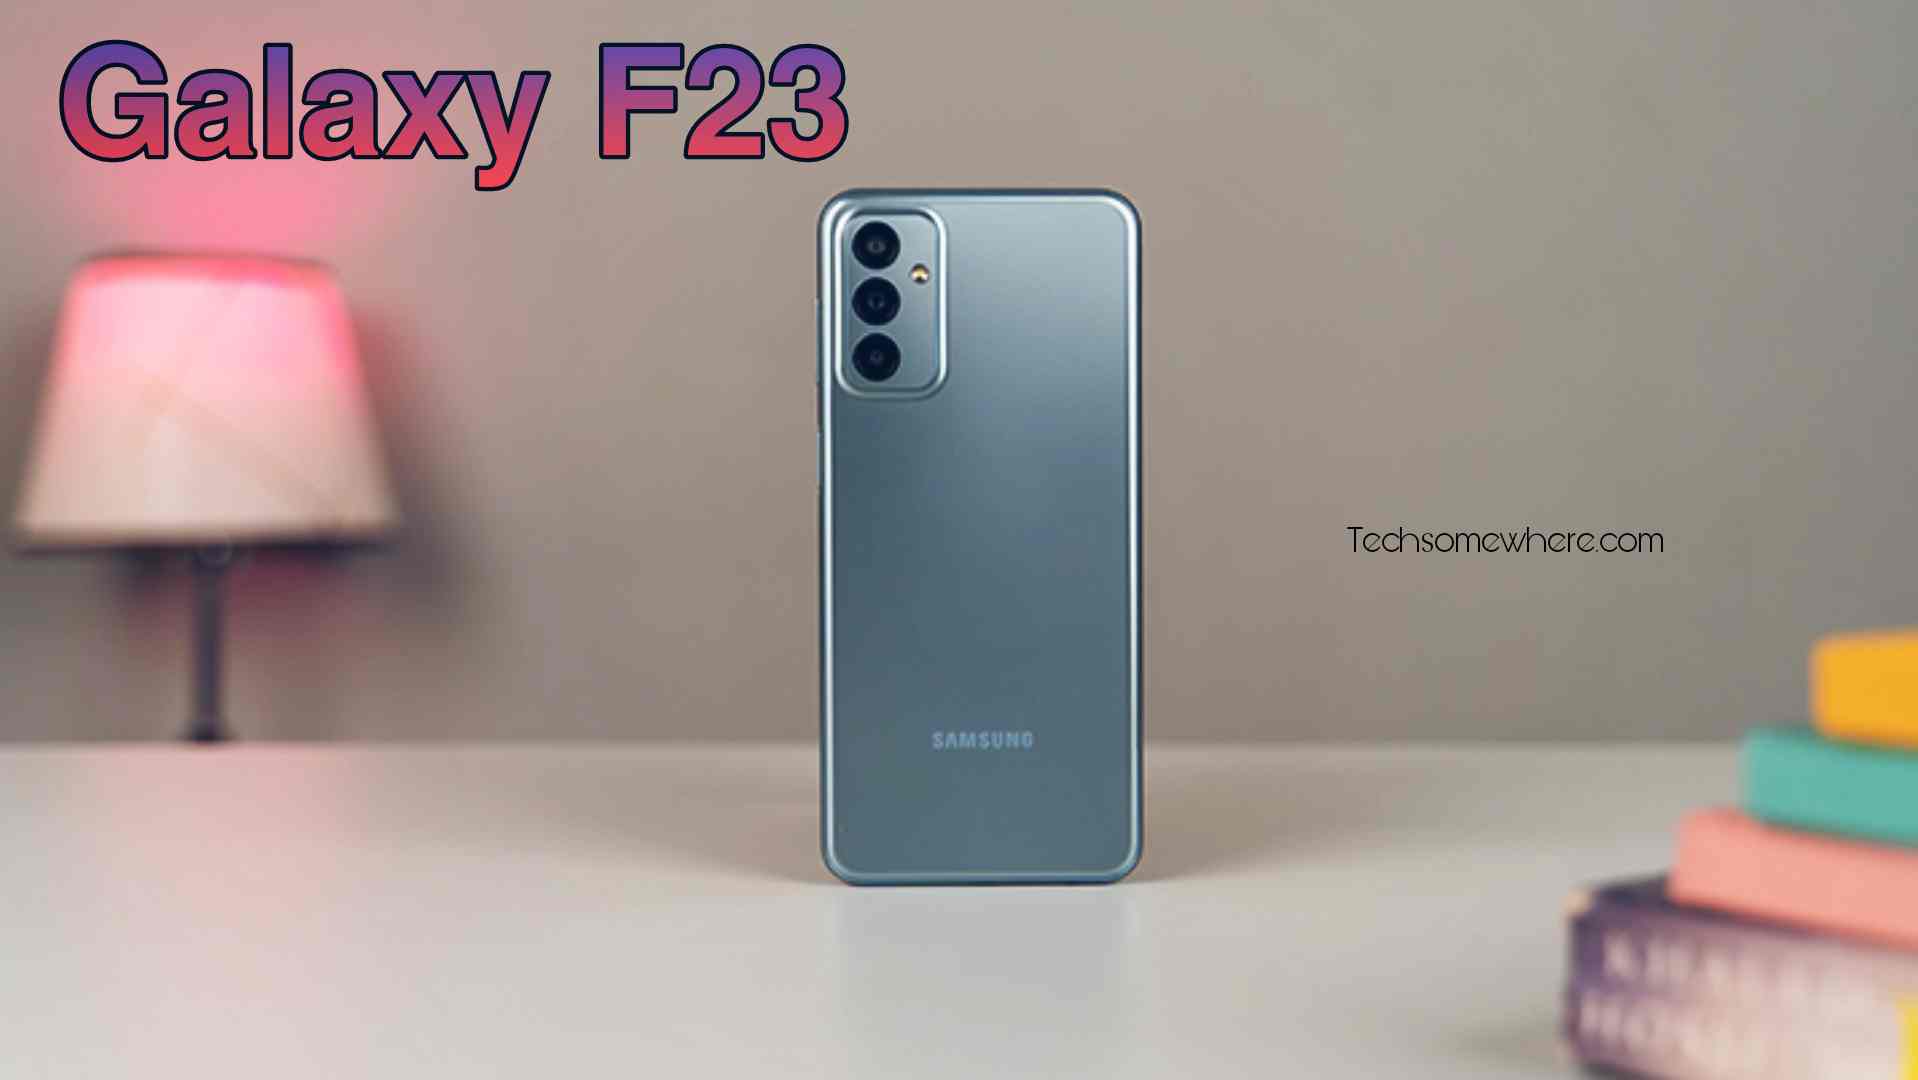 Samsung Galaxy F23 Price in Bangladesh, Specification & Release Date!